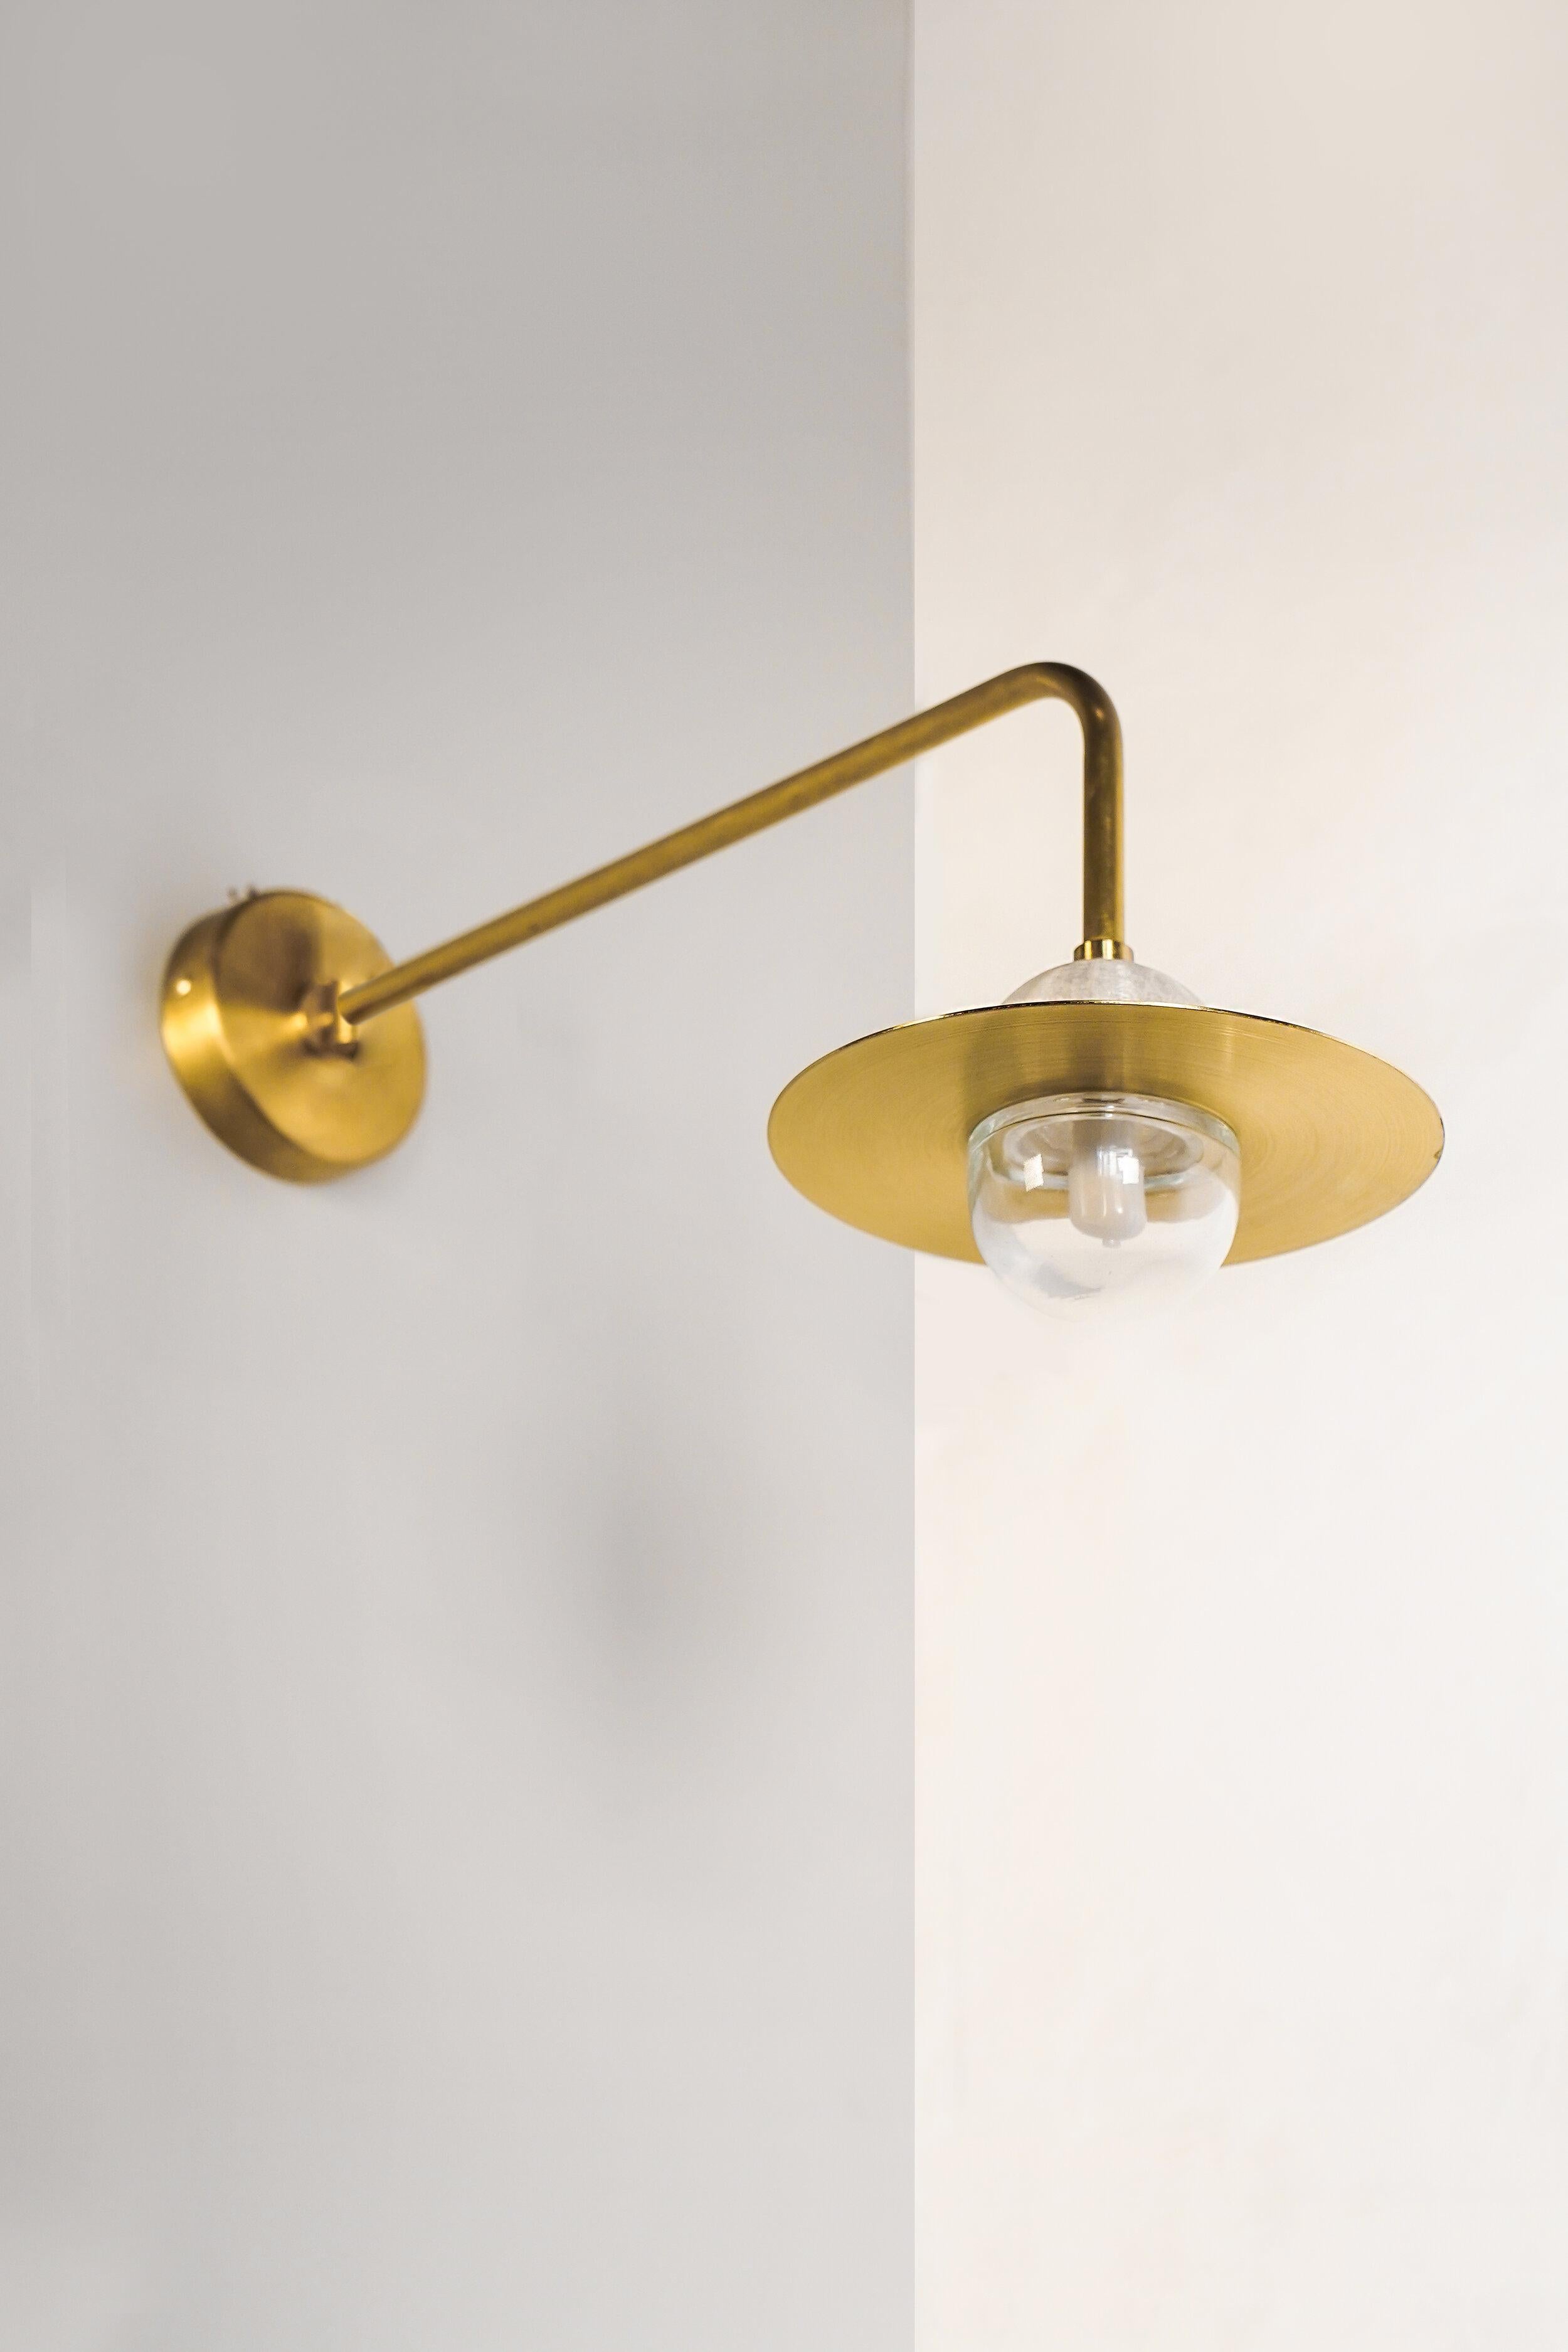 Alba Arm wall light by Contain
Dimensions: D 15 x W 22 x H 41 cm 
Materials: Brass, 3D printed PLA structure and optical lens.
Available in different finishes: black, antique black, polished or brushed brass, nickel plated. 

All our lamps can